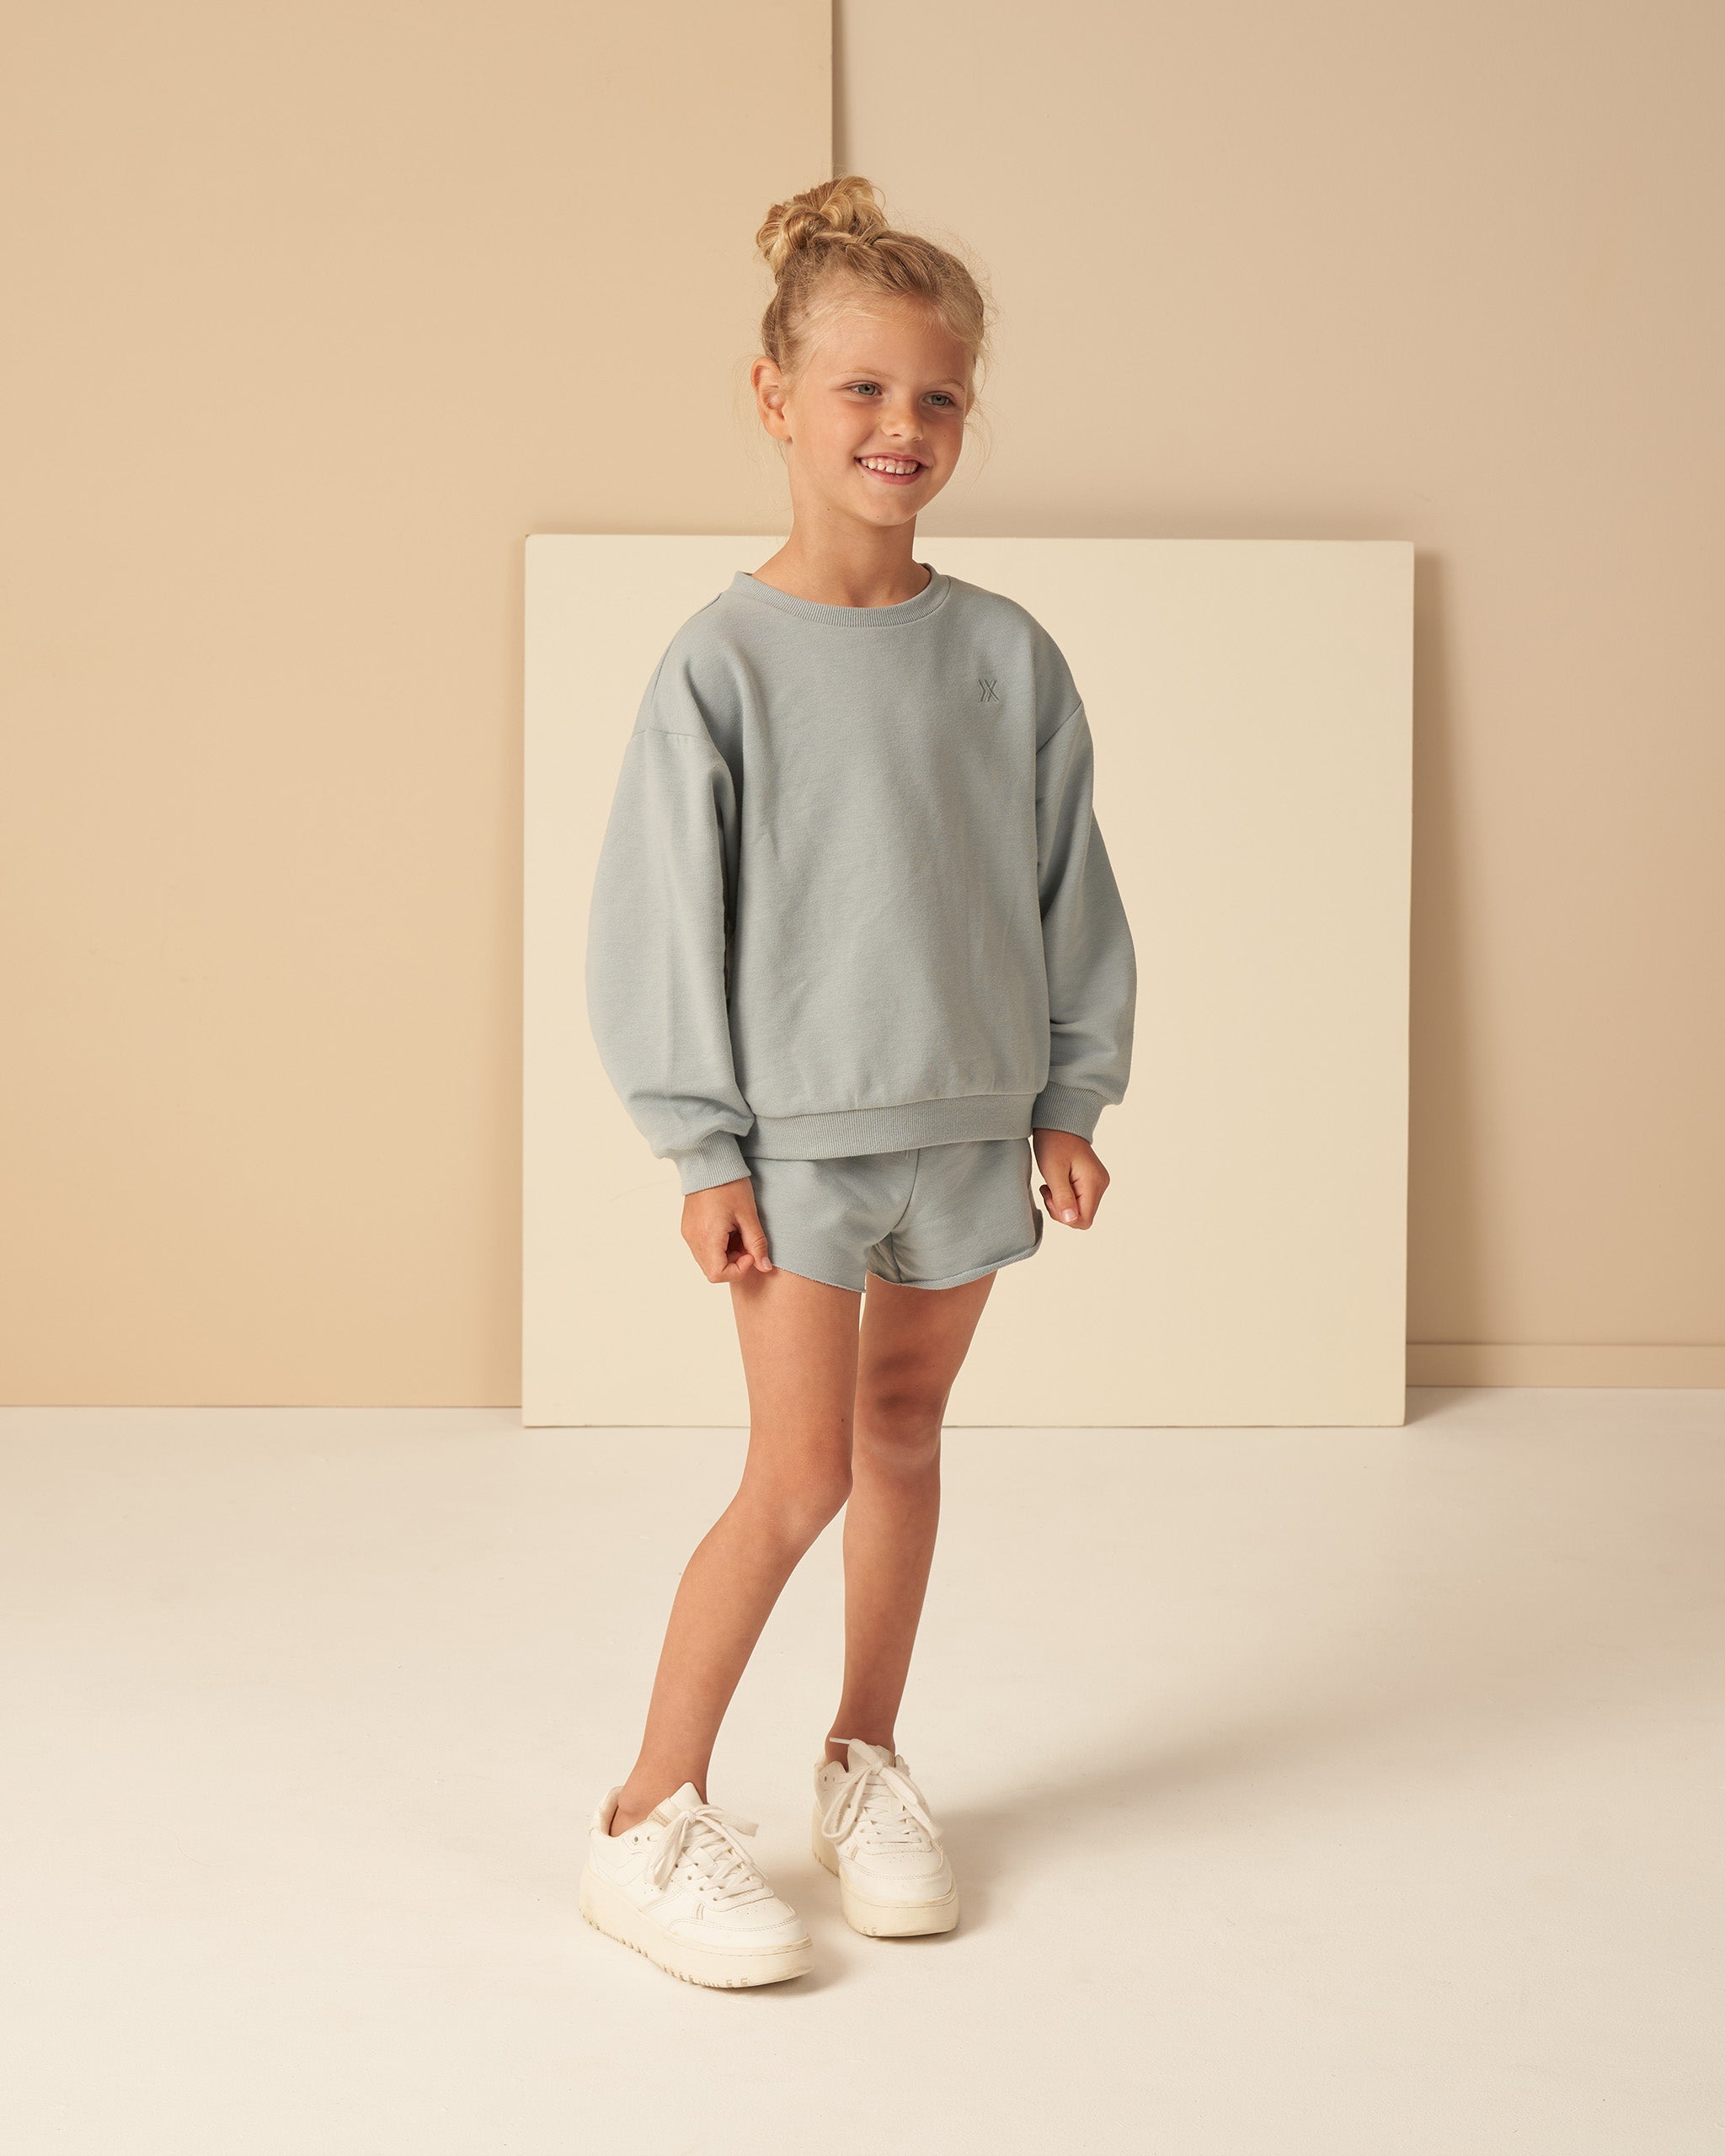 Sweat Short || Blue - Rylee + Cru | Kids Clothes | Trendy Baby Clothes | Modern Infant Outfits |